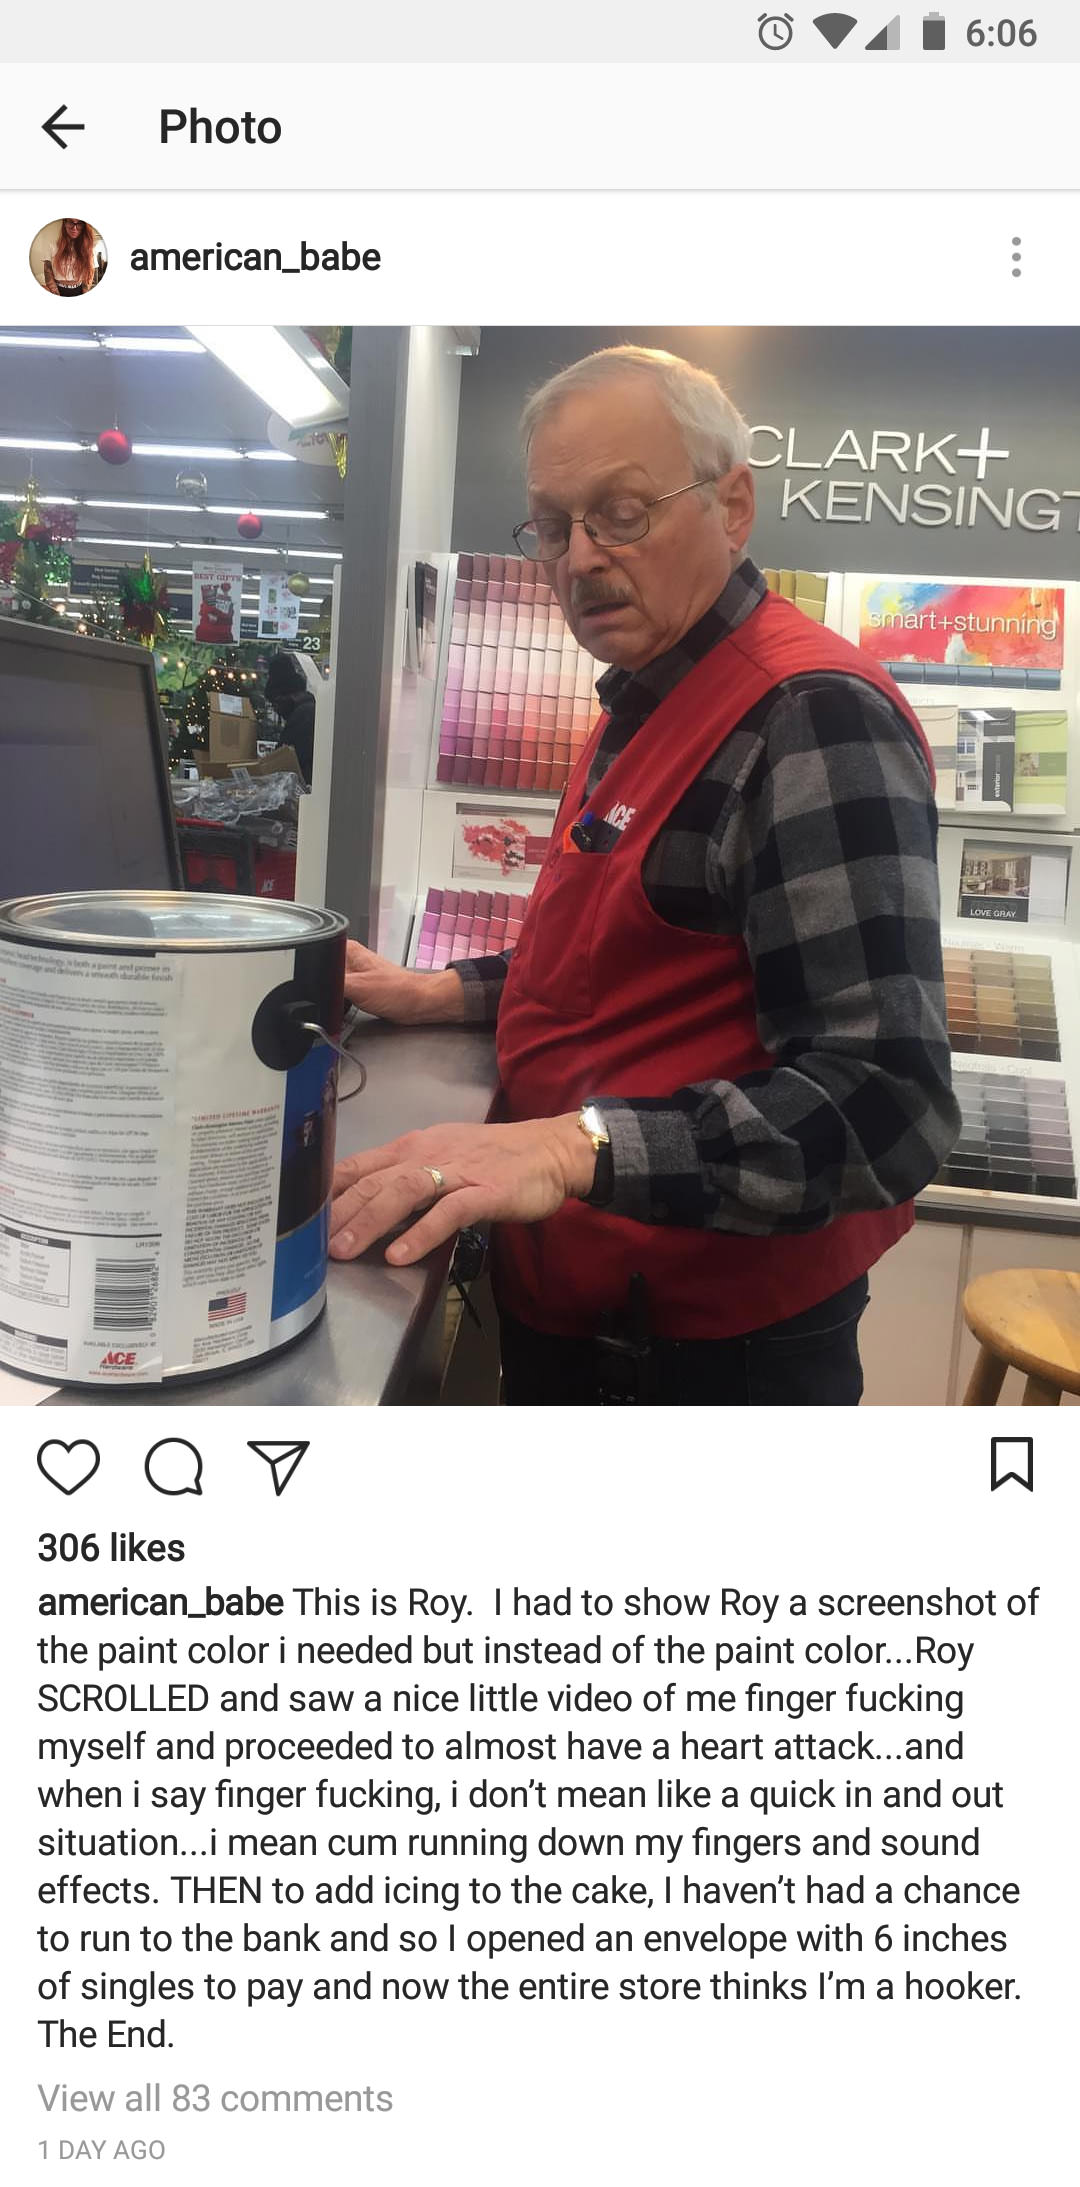 V4 Photo american_babe Clark Kensingt smartstunning Love Gray Be Ace Q V 306 american_babe This is Roy. I had to show Roy a screenshot of the paint color i needed but instead of the paint color... Roy Scrolled and saw a nice little video of me finger…